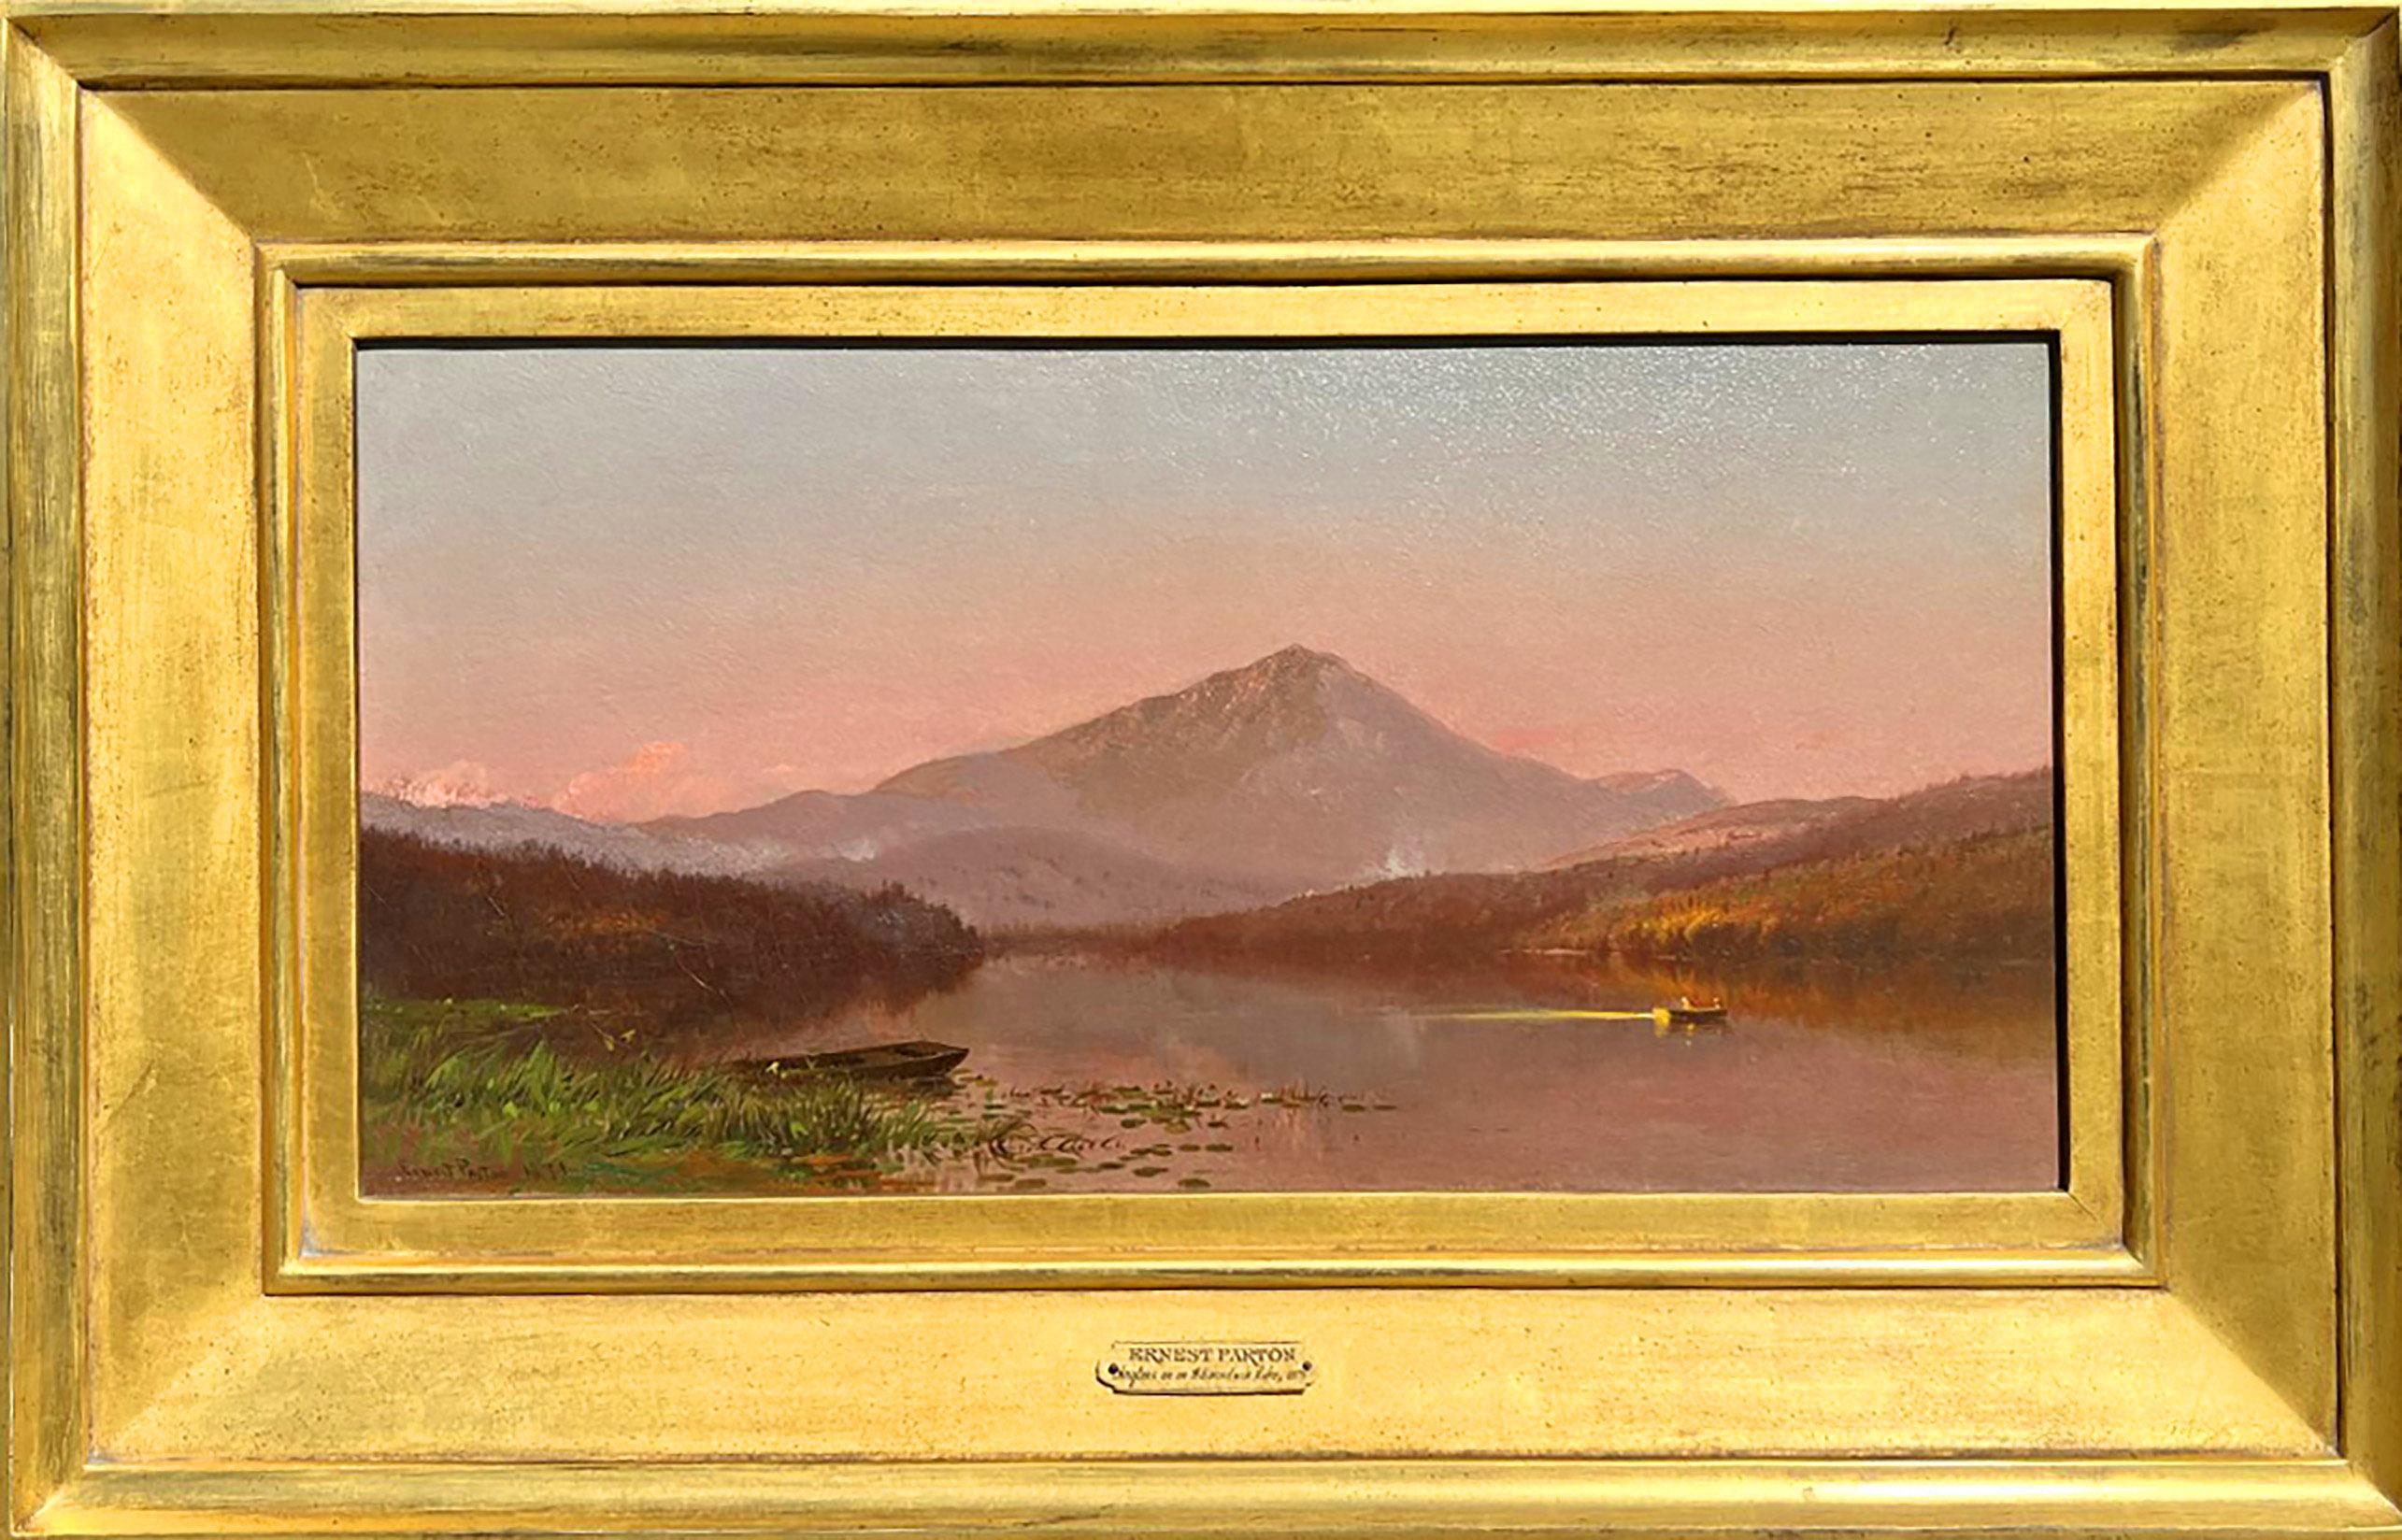 Hudson River School artist Ernest Parton's (1845-1933) "Anglers on an Adirondack Lake" is oil on canvas, measures 10 x 20 inches, and is signed and dated 1871 at the lower left. The work is framed in a period appropriate frame and ready to hang.